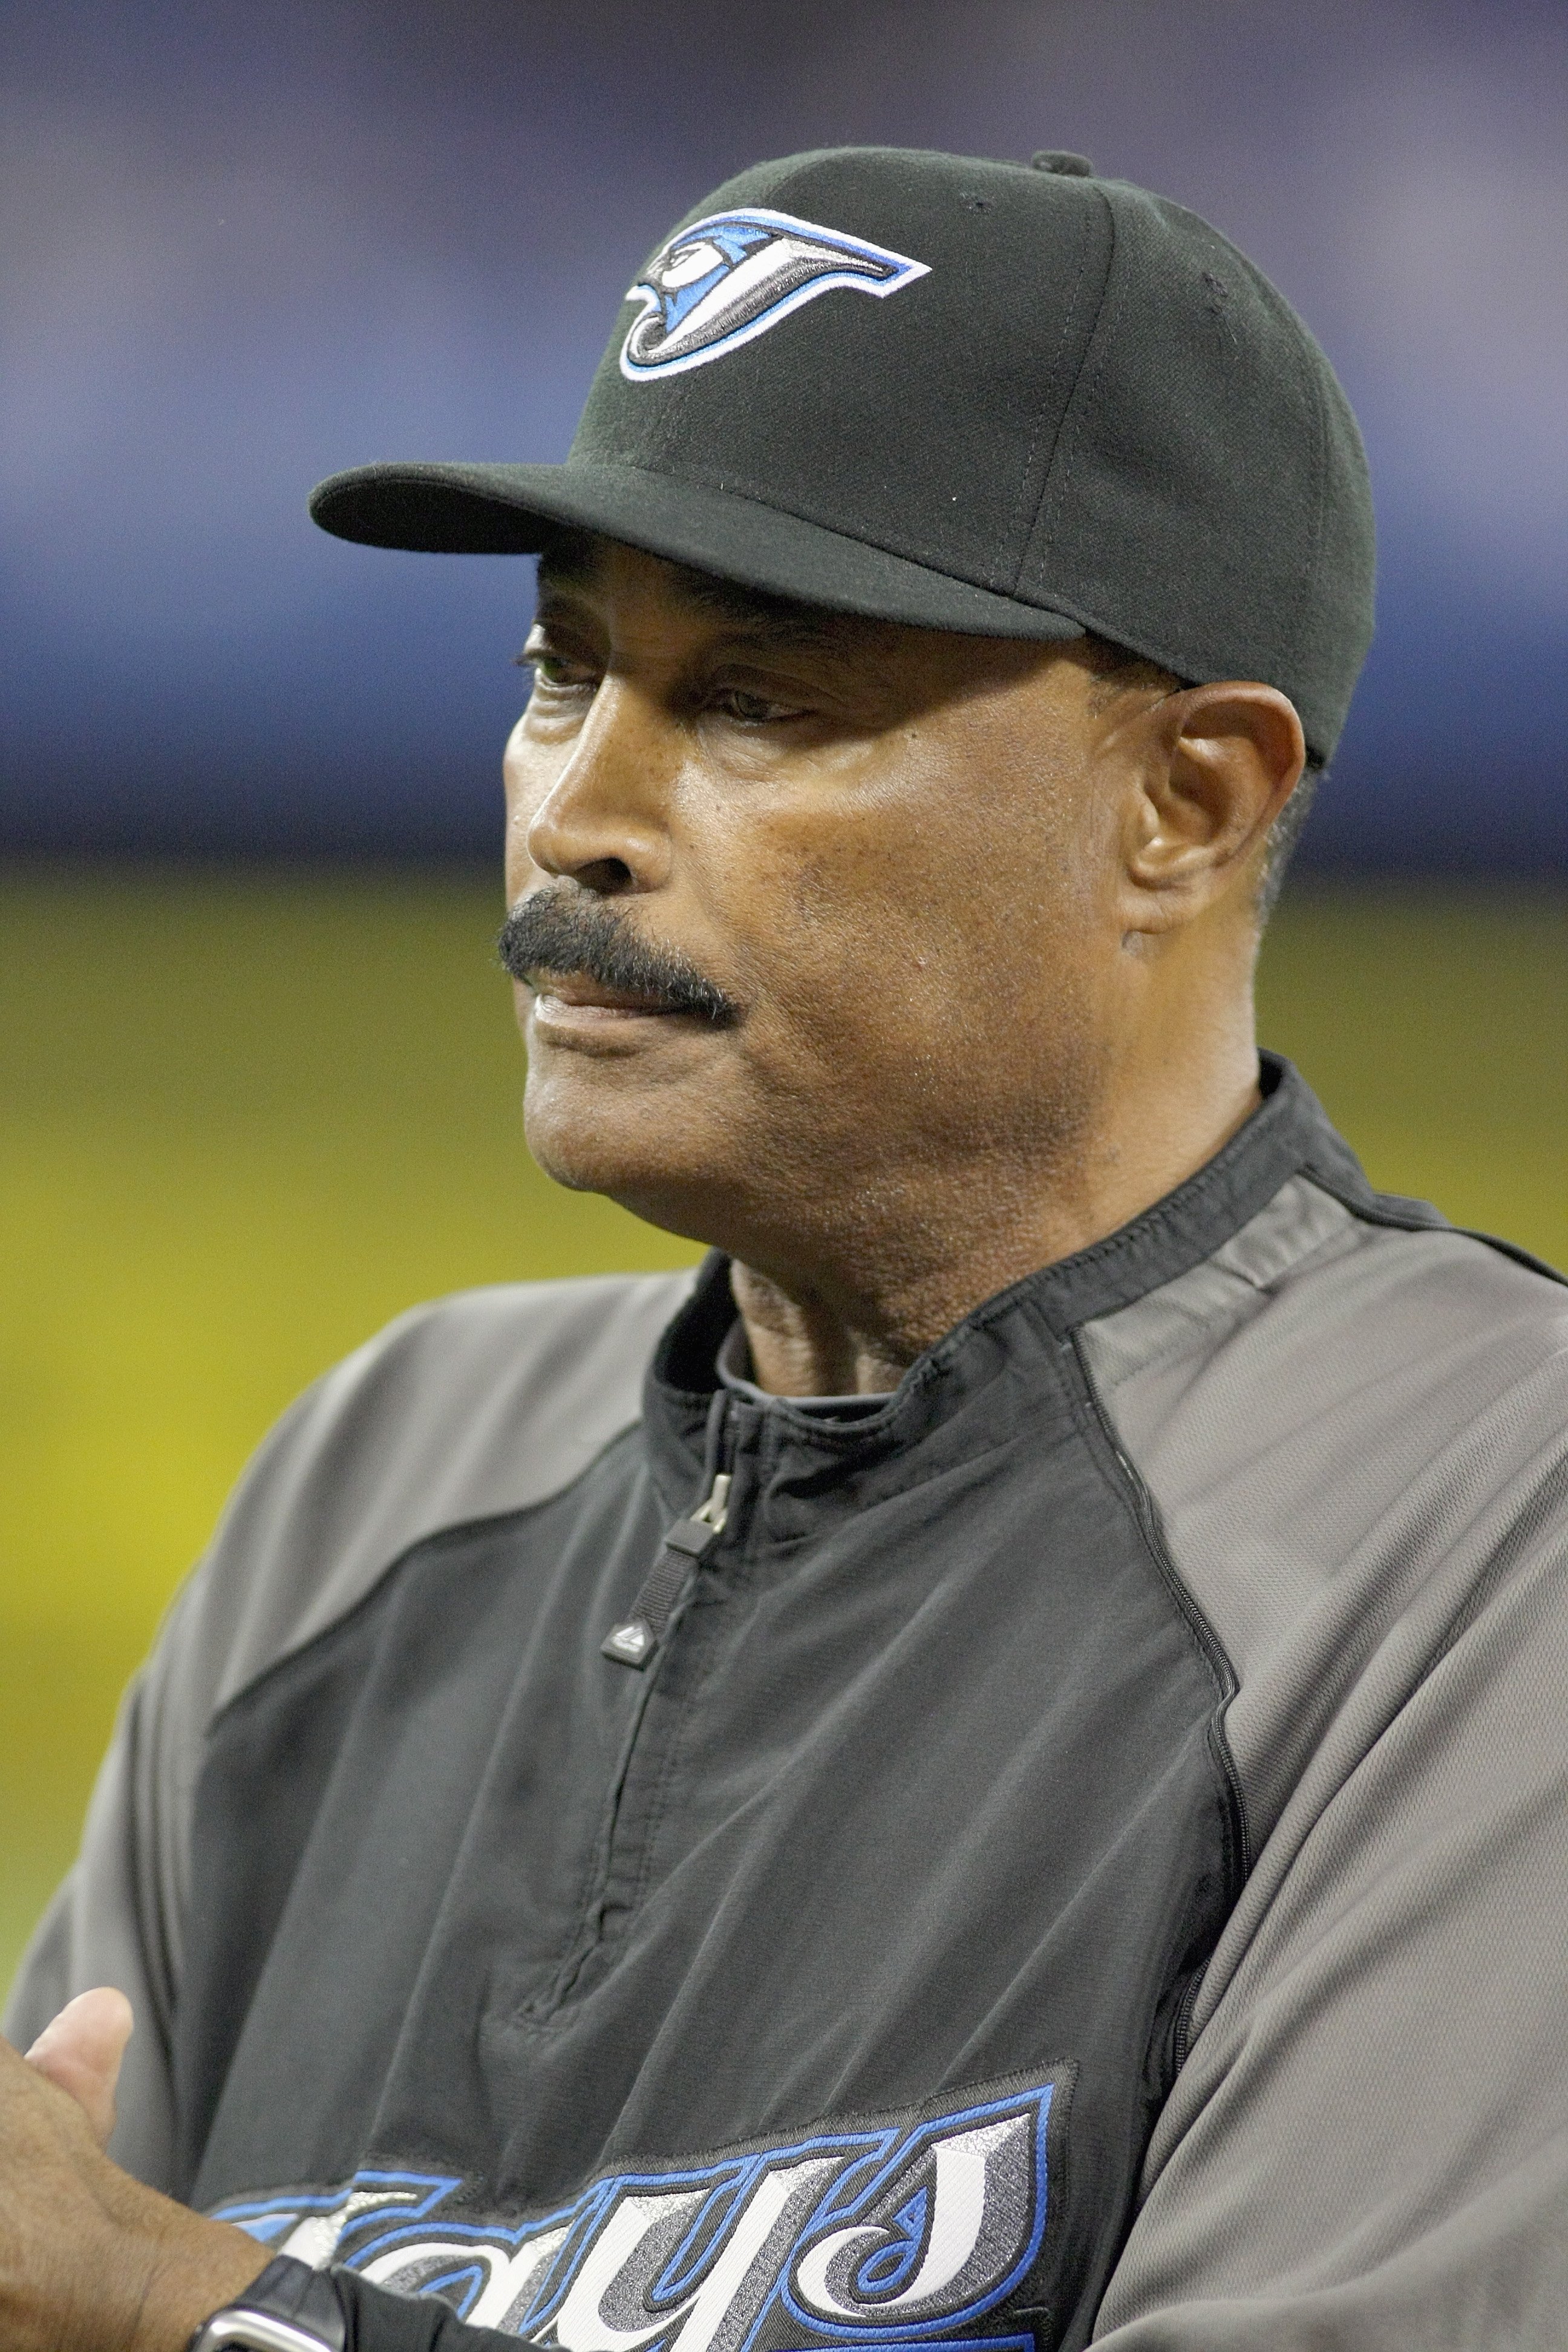 Cito Gaston is managing in his final season has manager.